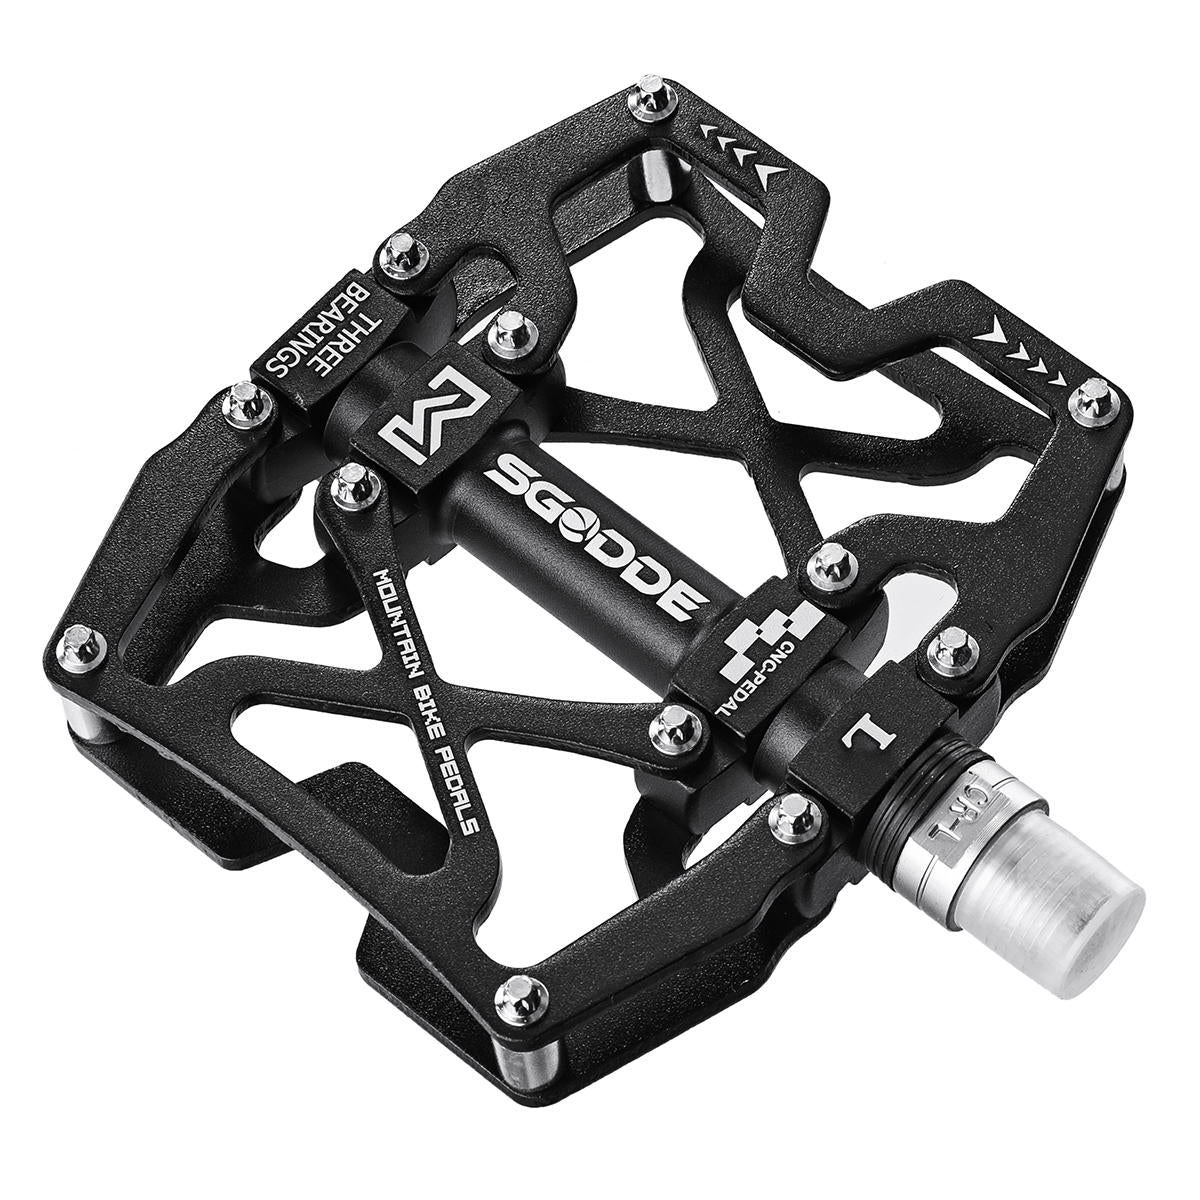 1 Pair Anti-slip Bike Pedals 3 Bearing Aluminum Alloy Cycling Bicycle Platform  Bicycle Pedal Bike Accessories Part for Road bmx Mtb Bicycle